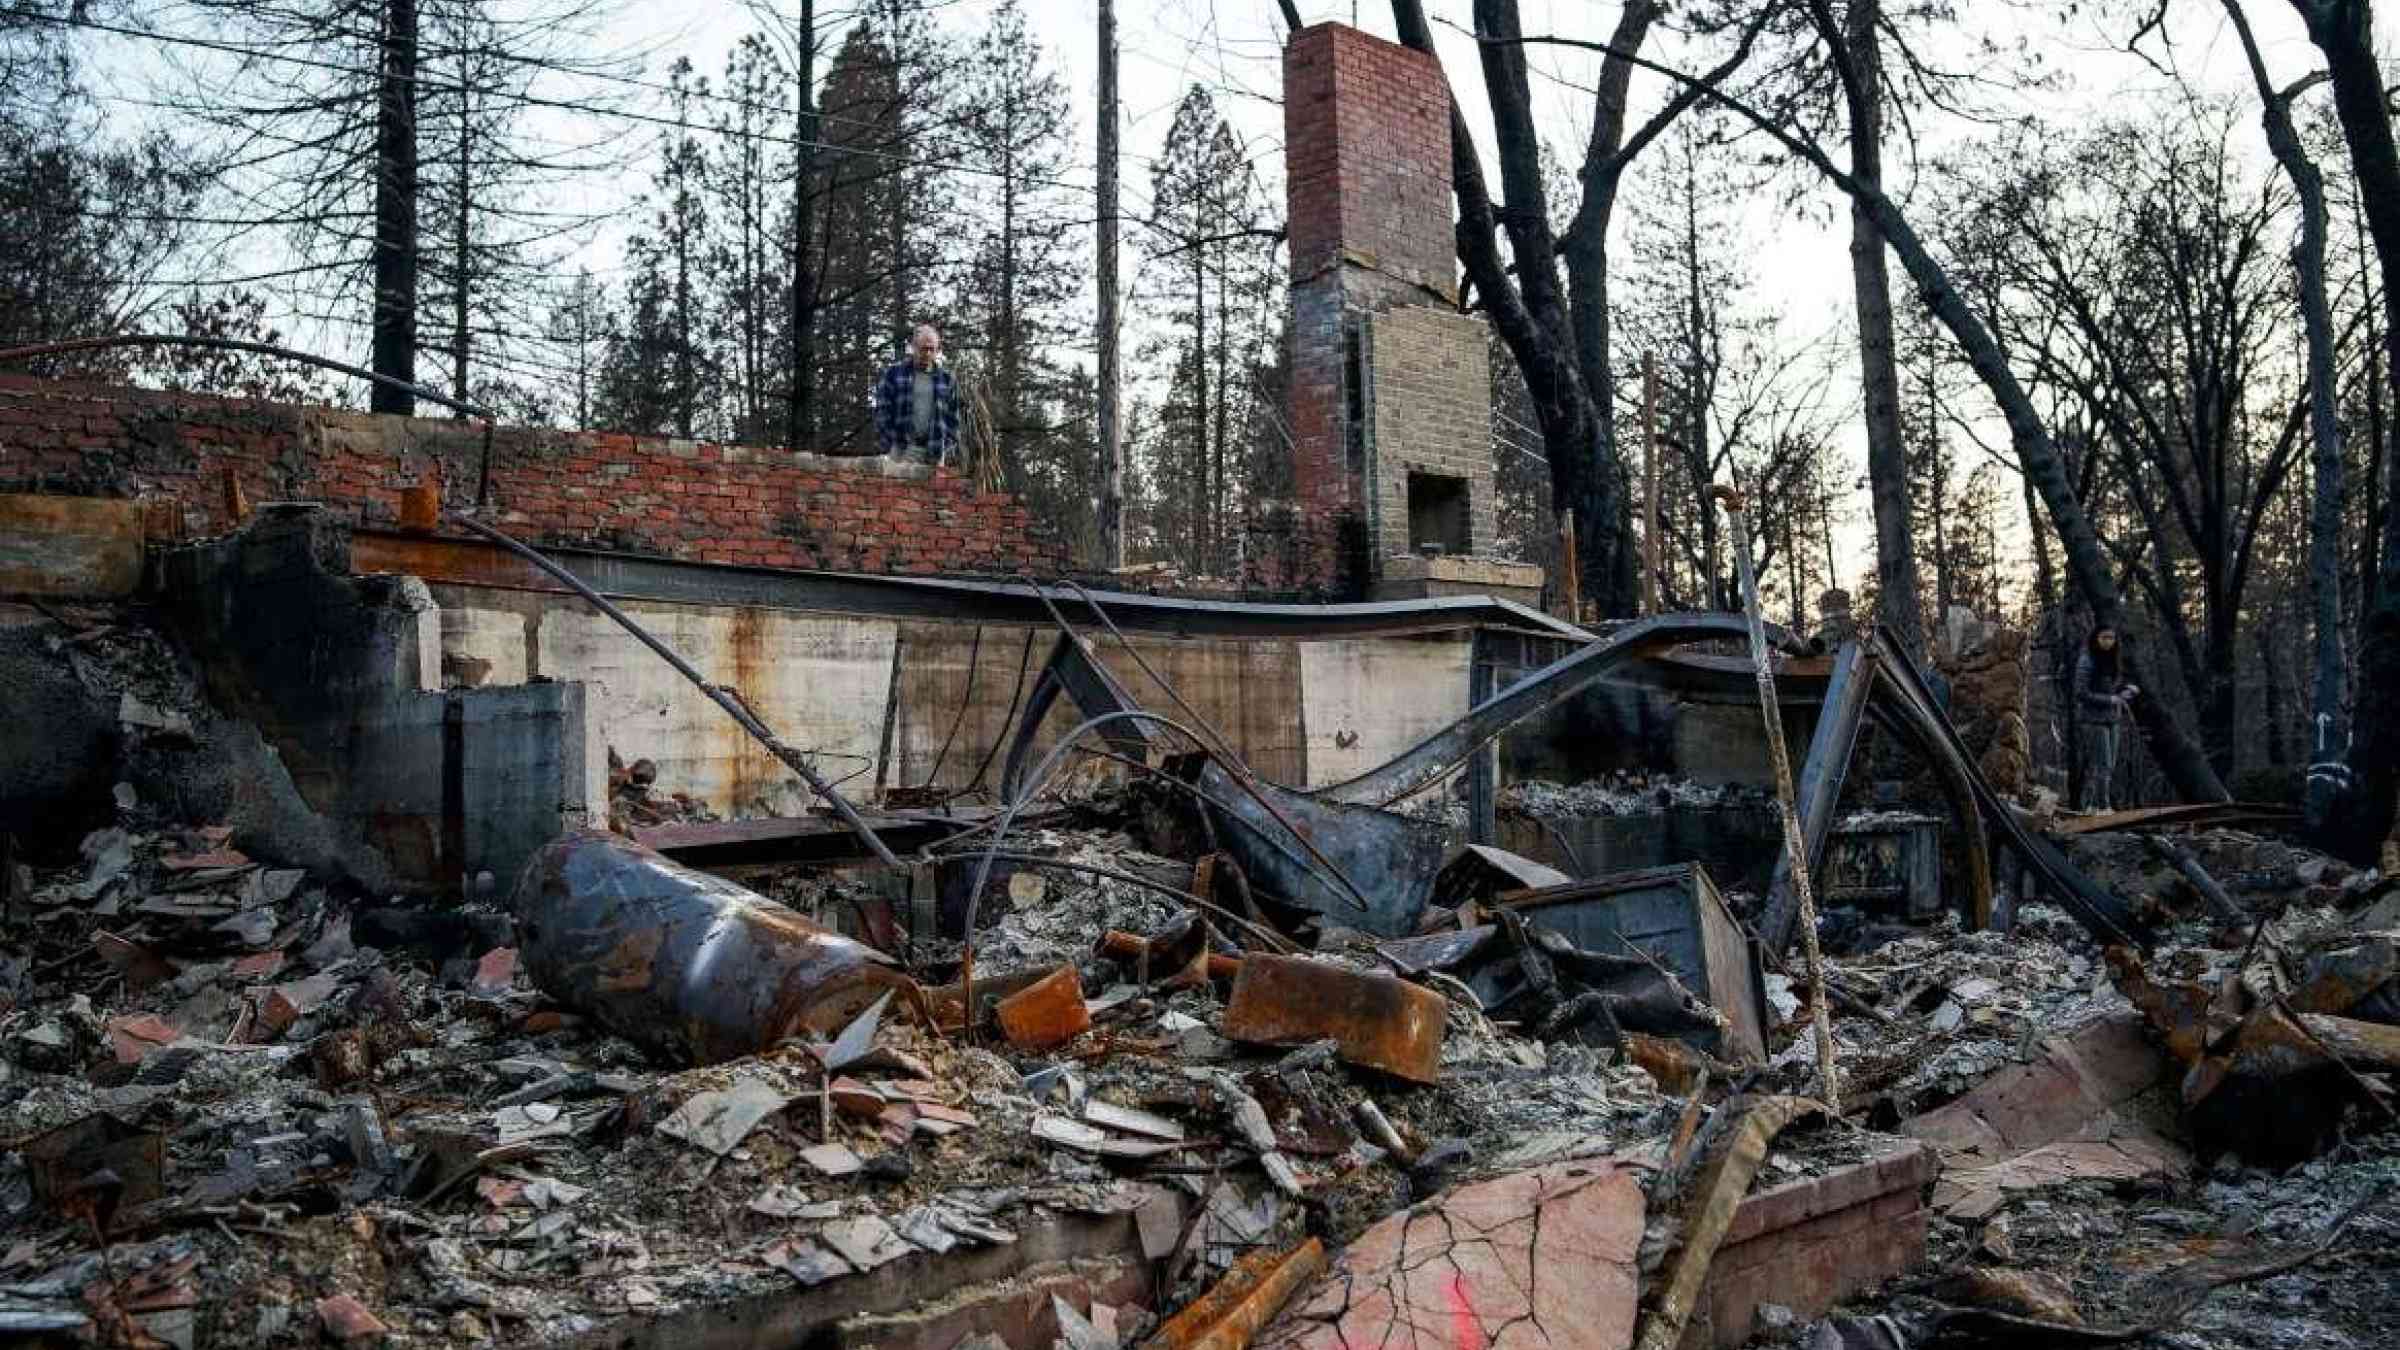 Remnants of a burned home in Paradise California after the Camp Fire that occurred in November 2018. M Yerman / Shutterstock.com